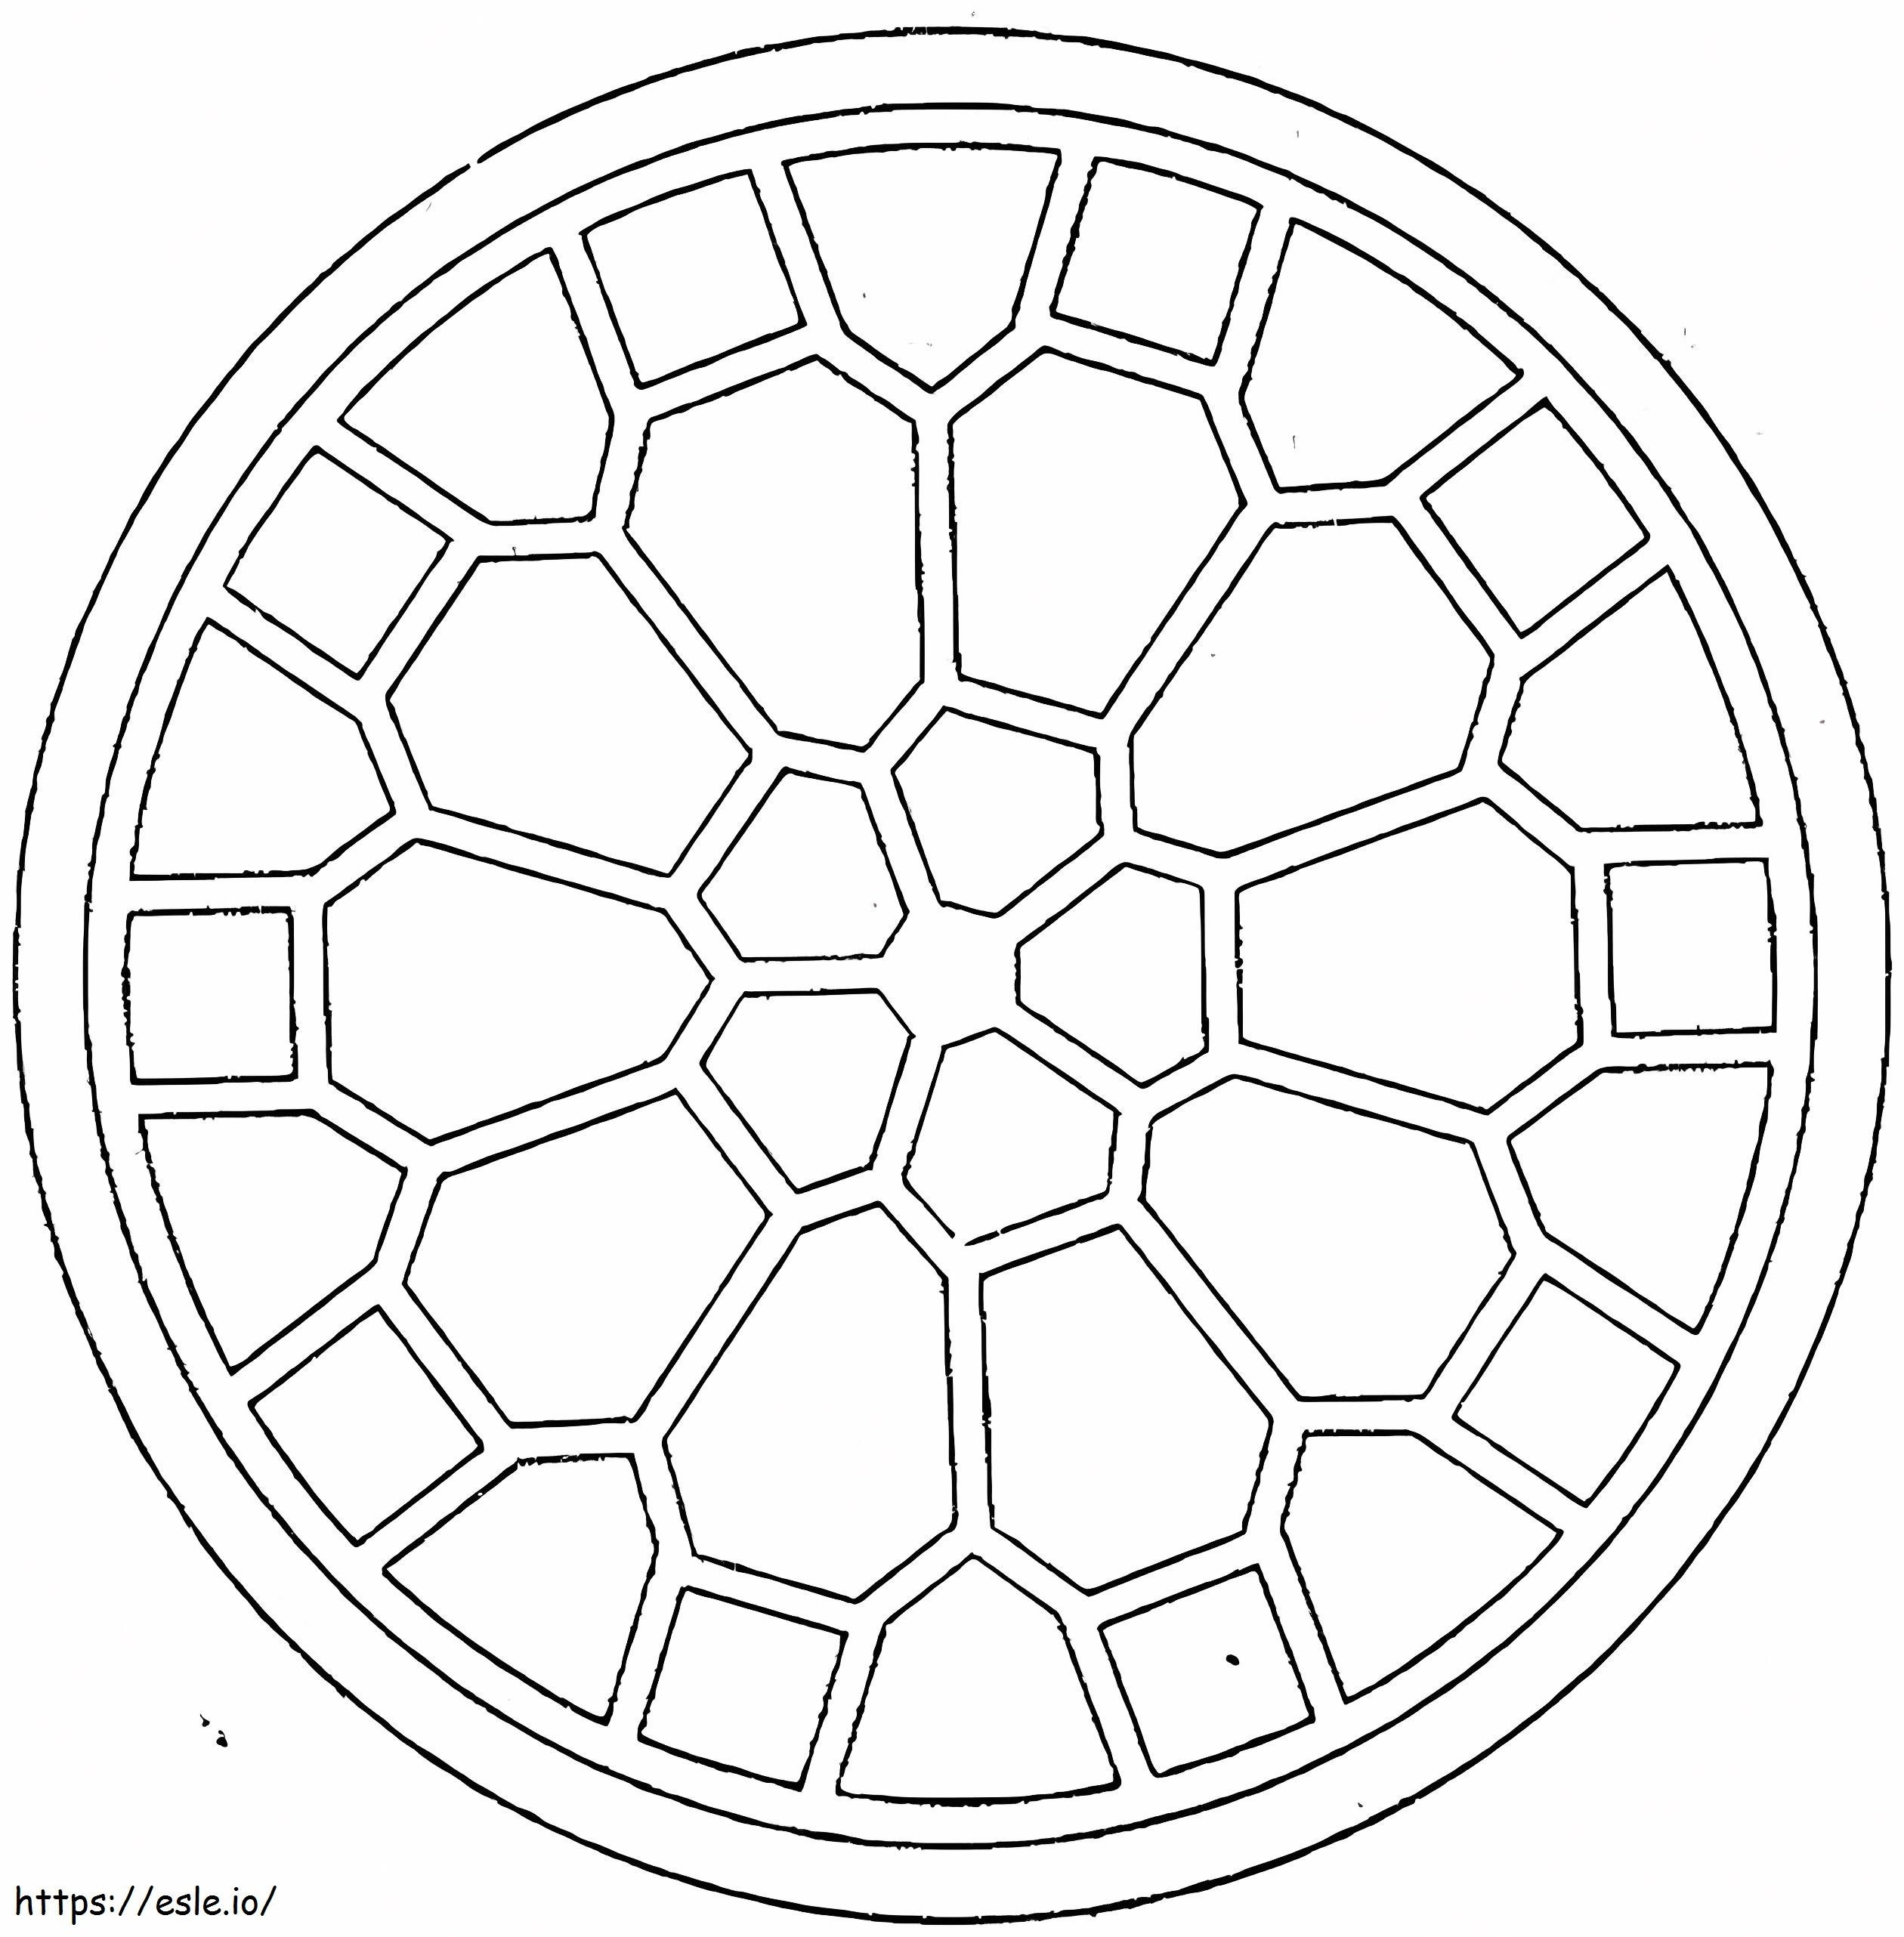 1572223220 Easy Geometric For Kids coloring page